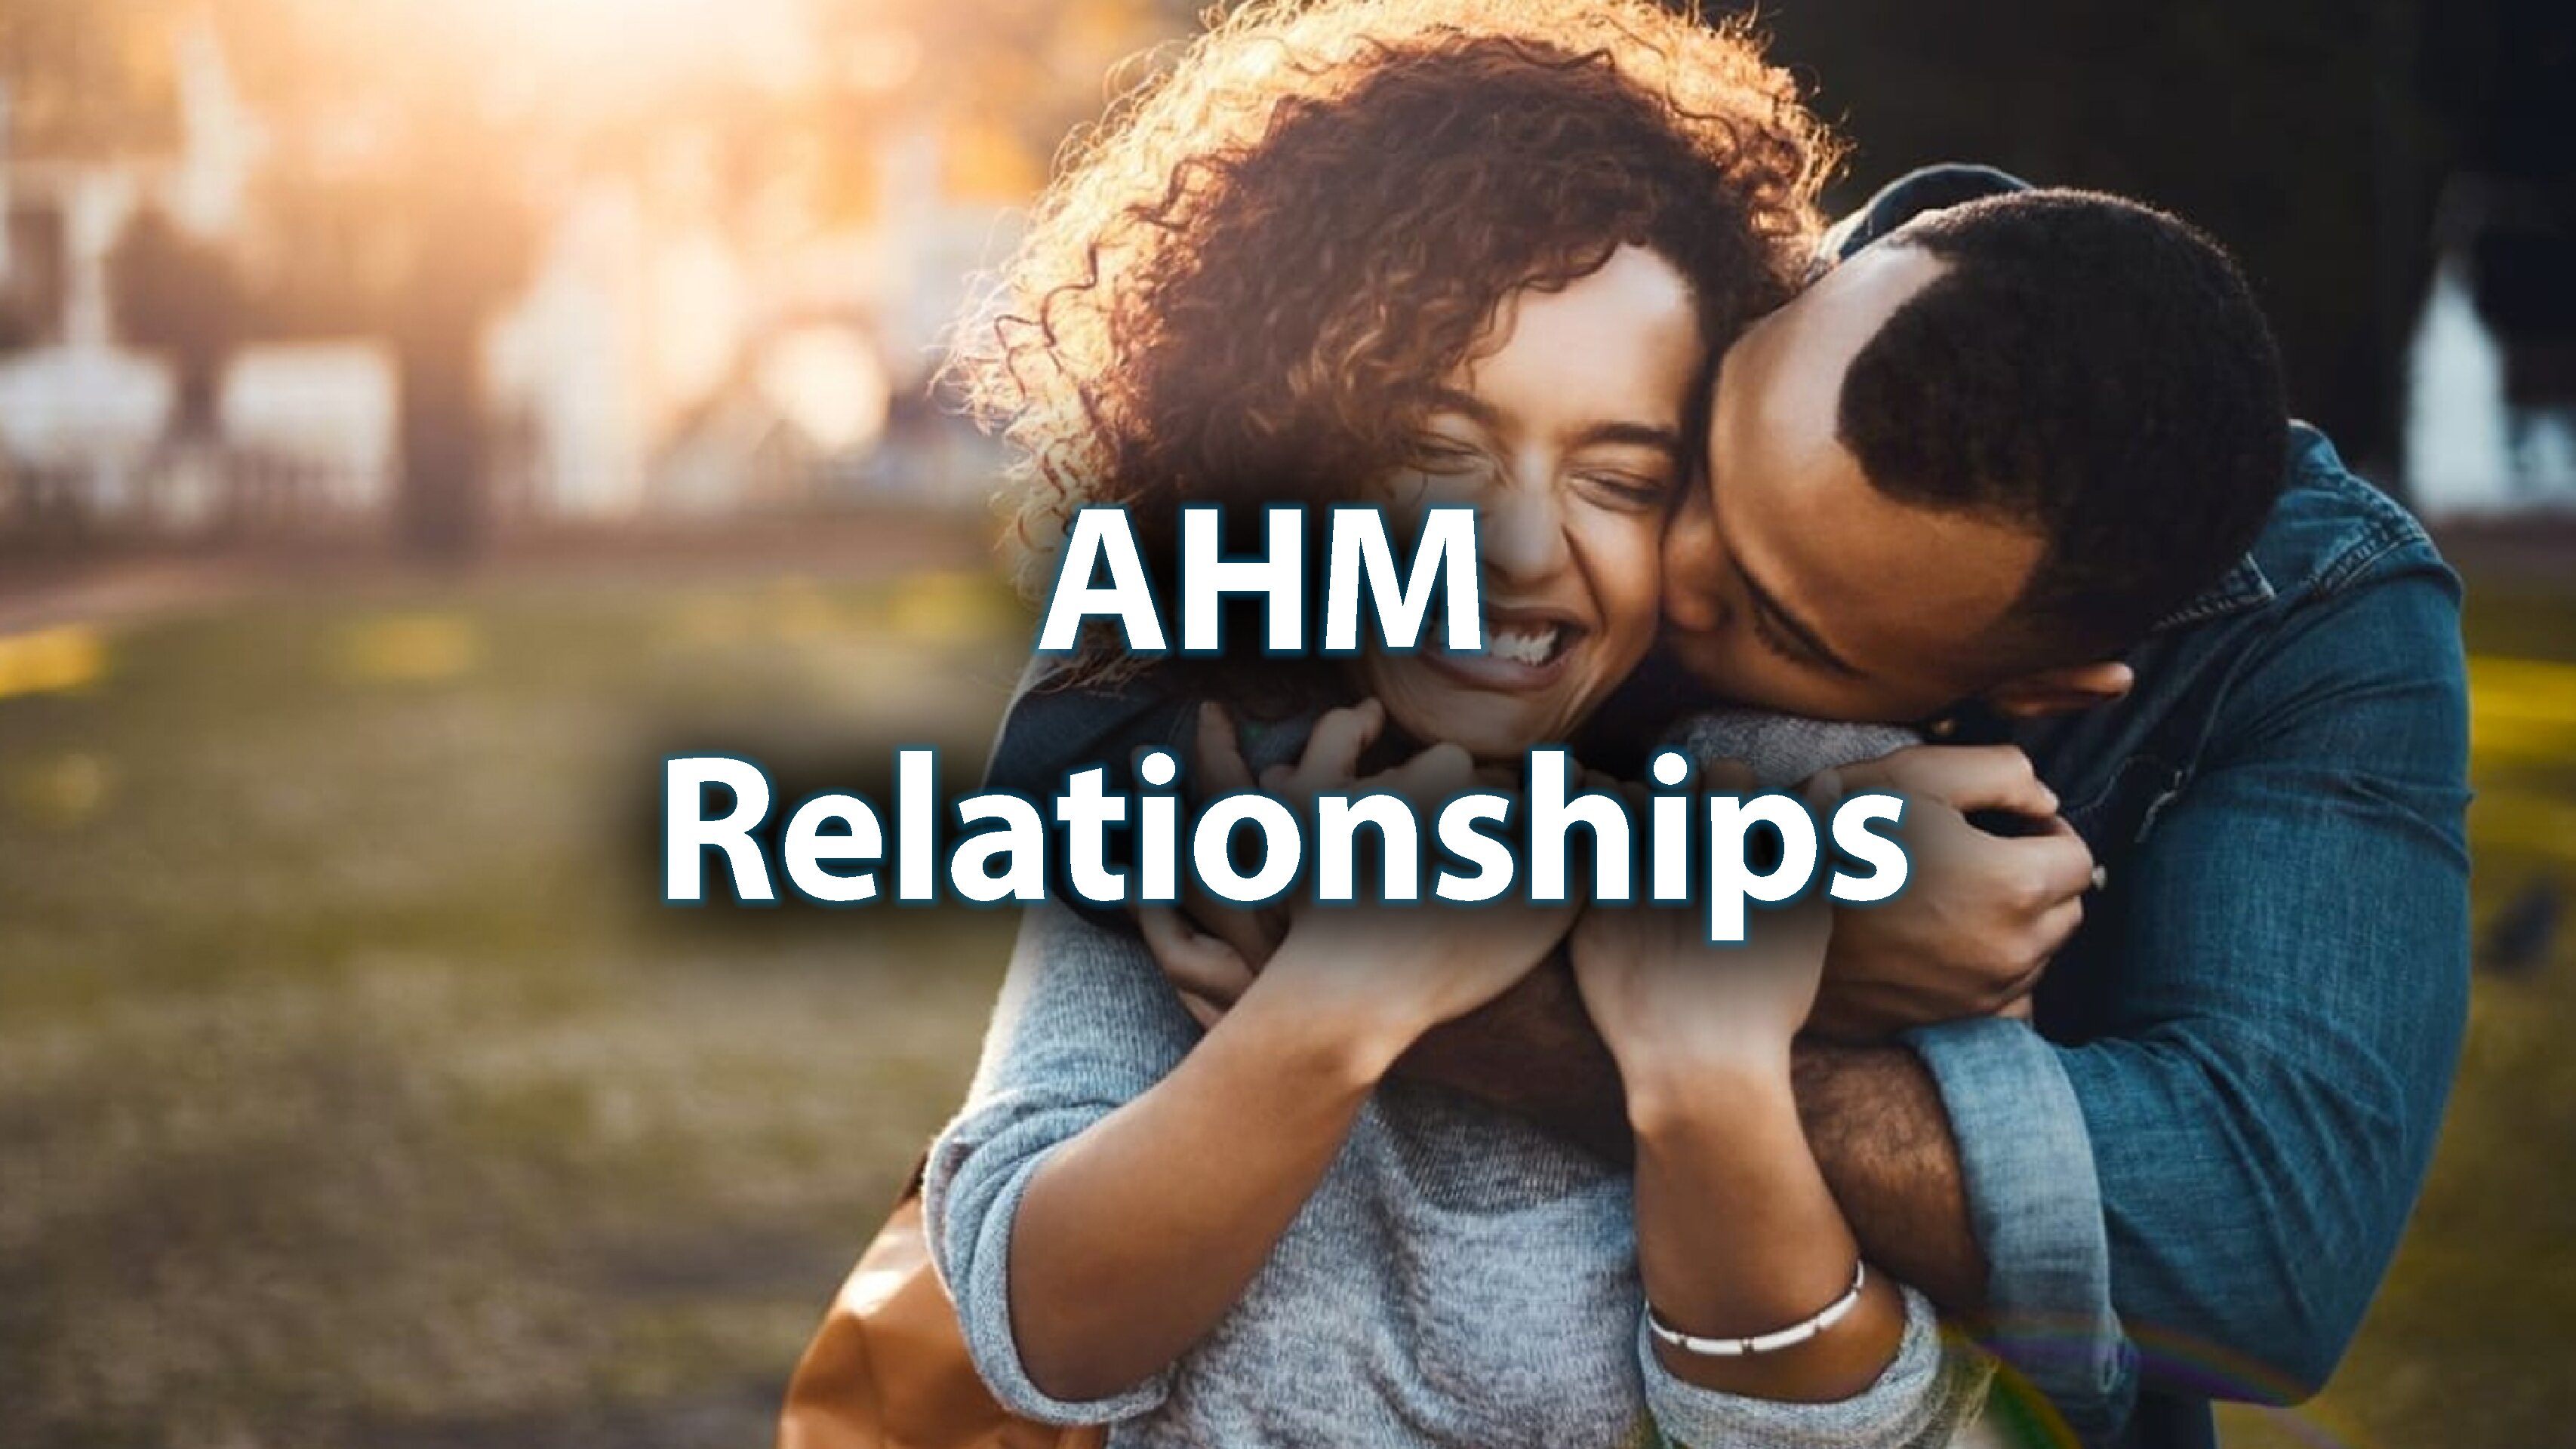 Day 24: AHM Relationships